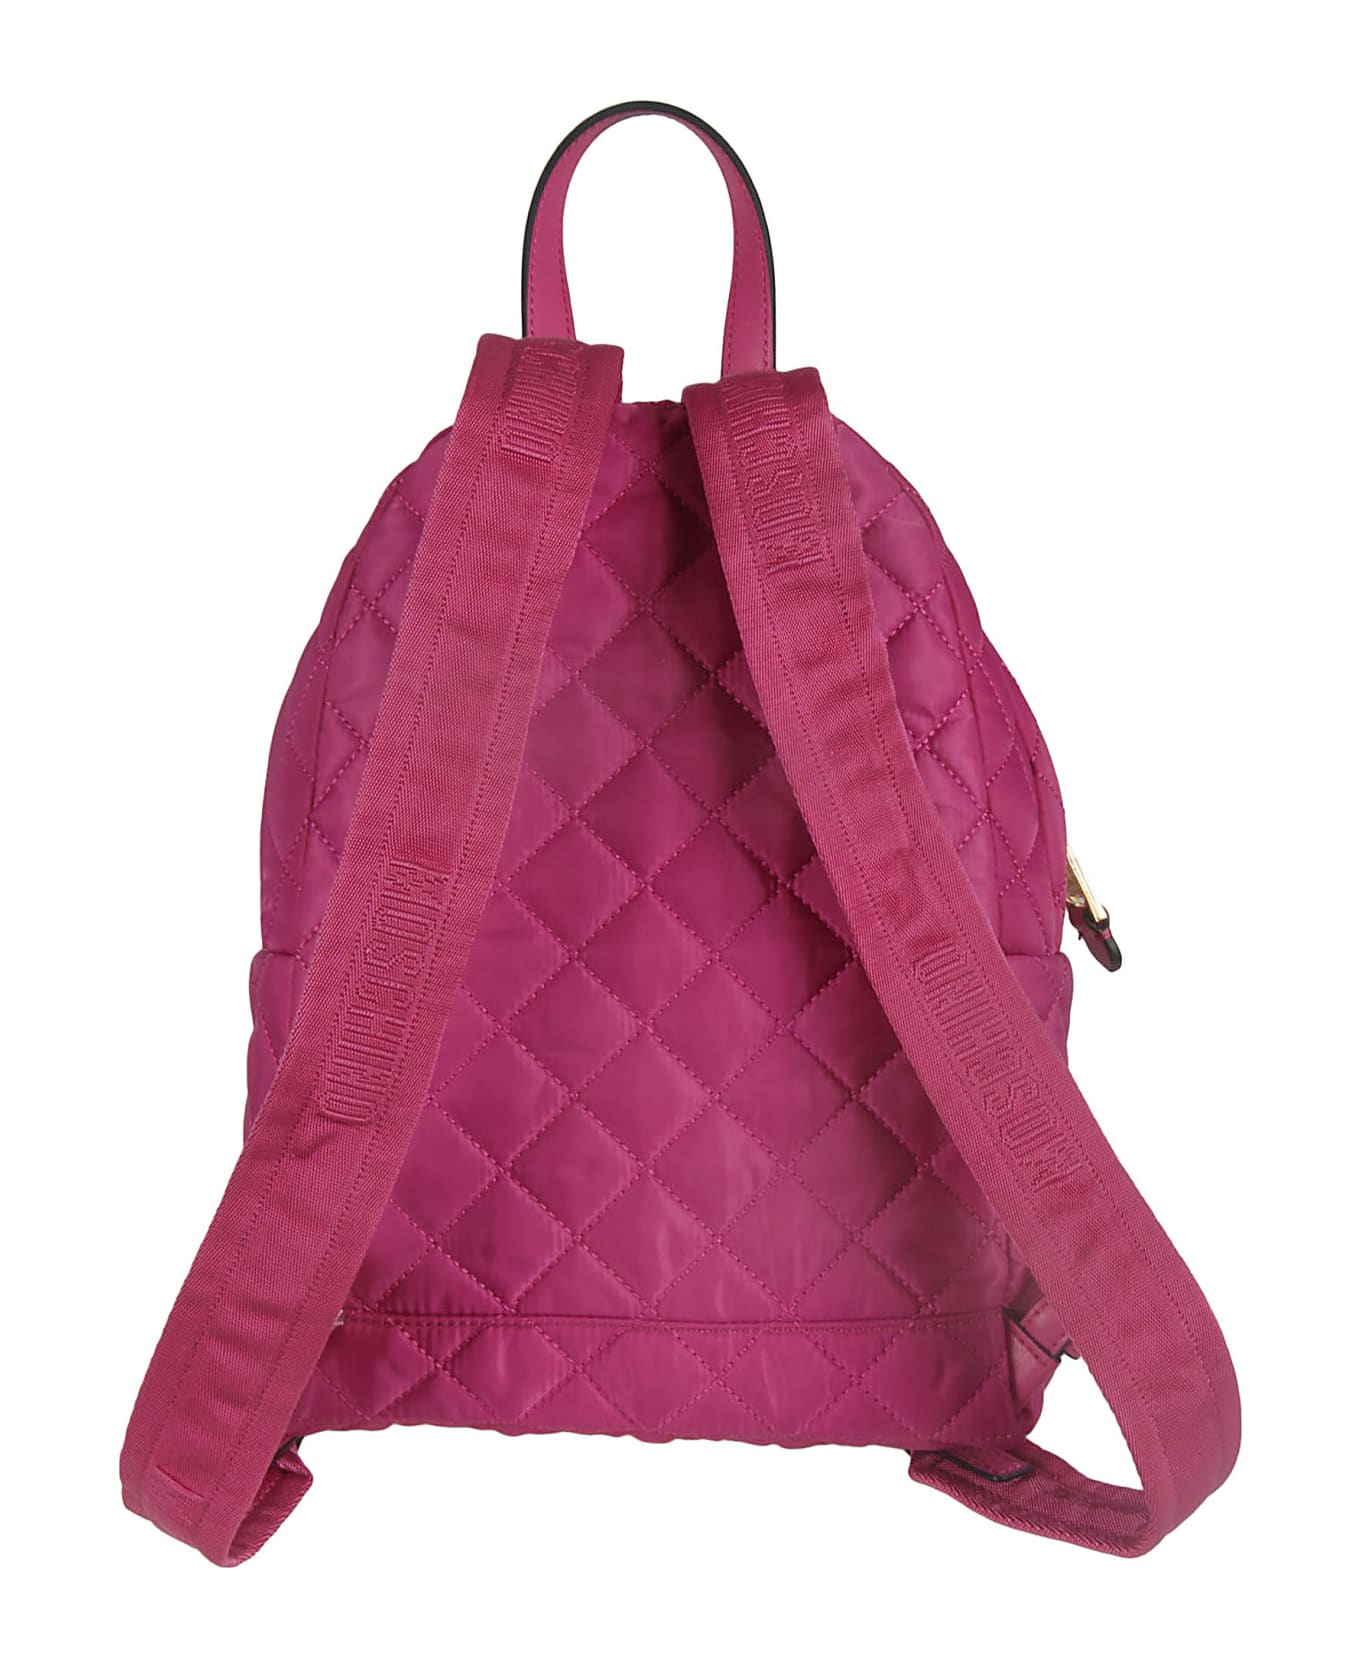 Moschino Quilted Logo Patched Backpack - Purple